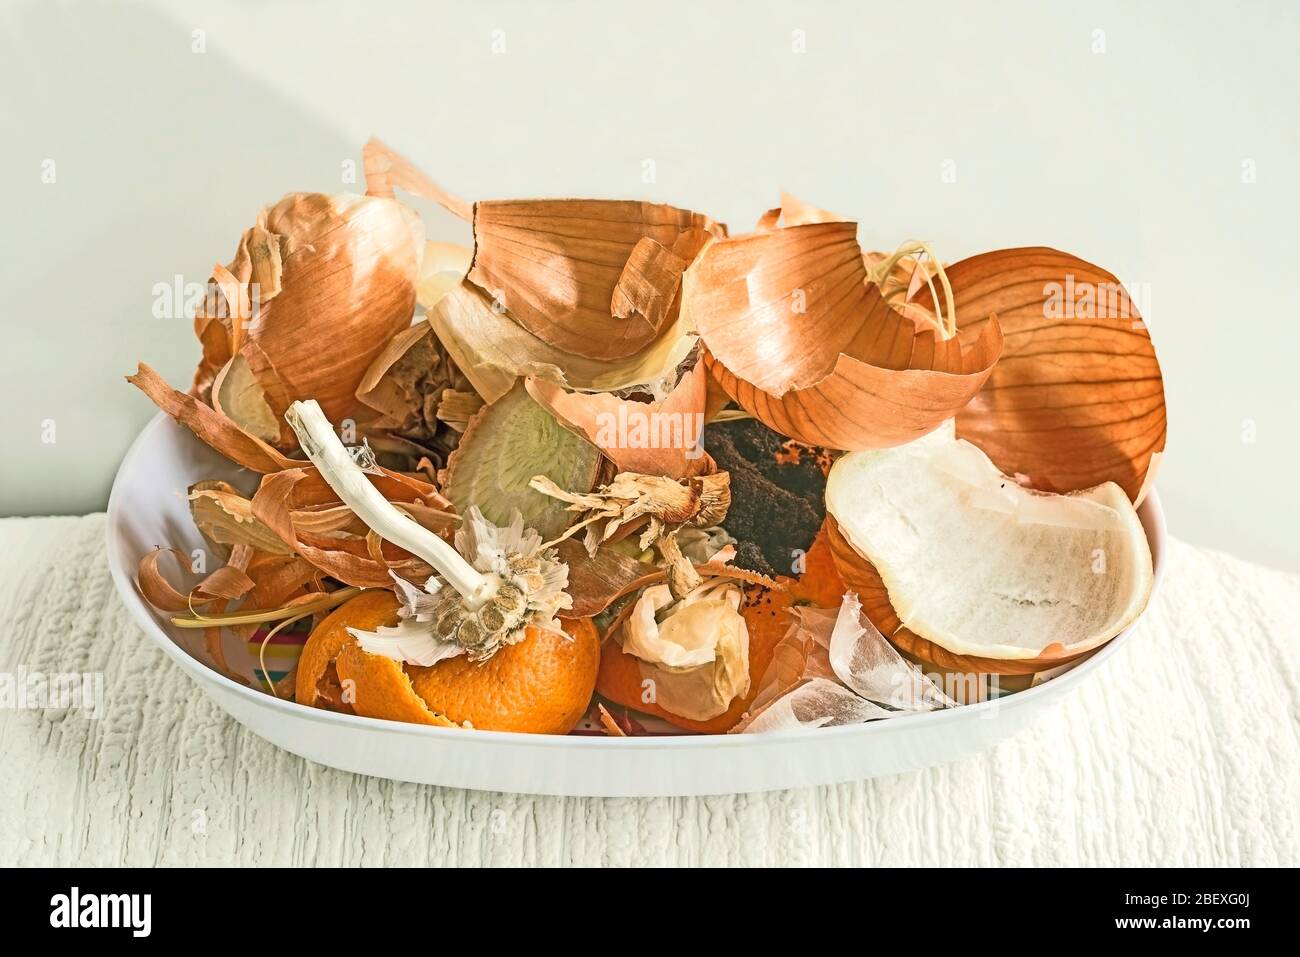 Onion peel, coffee grounds, tea bags and garlic stem, orange peel in white bowl against white background. Concept composting, Eco-friendly, recycling. Stock Photo